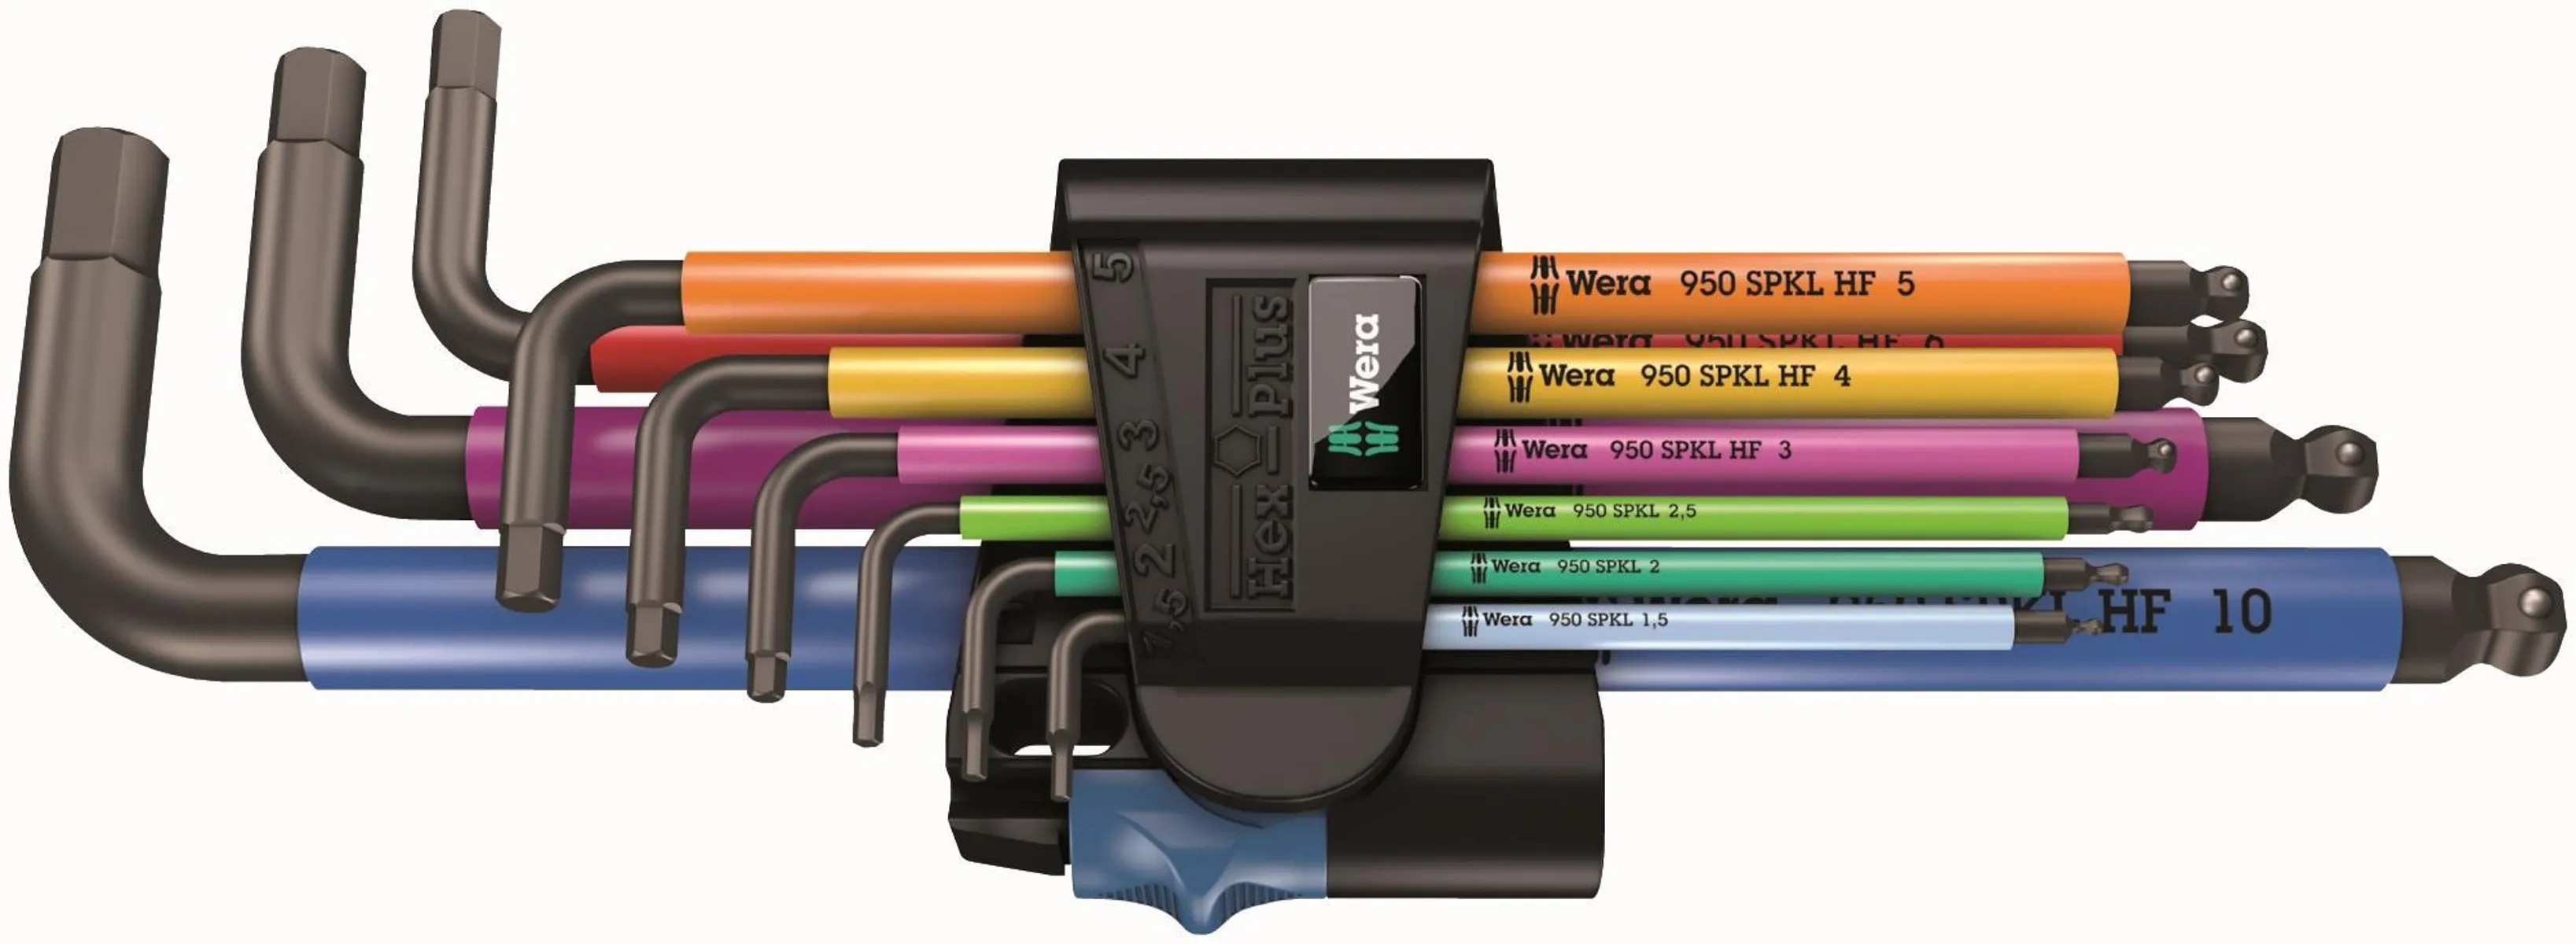 Wera 950/9 Hex-Plus Multicolour HF 1 L-key BlackLaser Metric 9 Piece Set With Holding Function